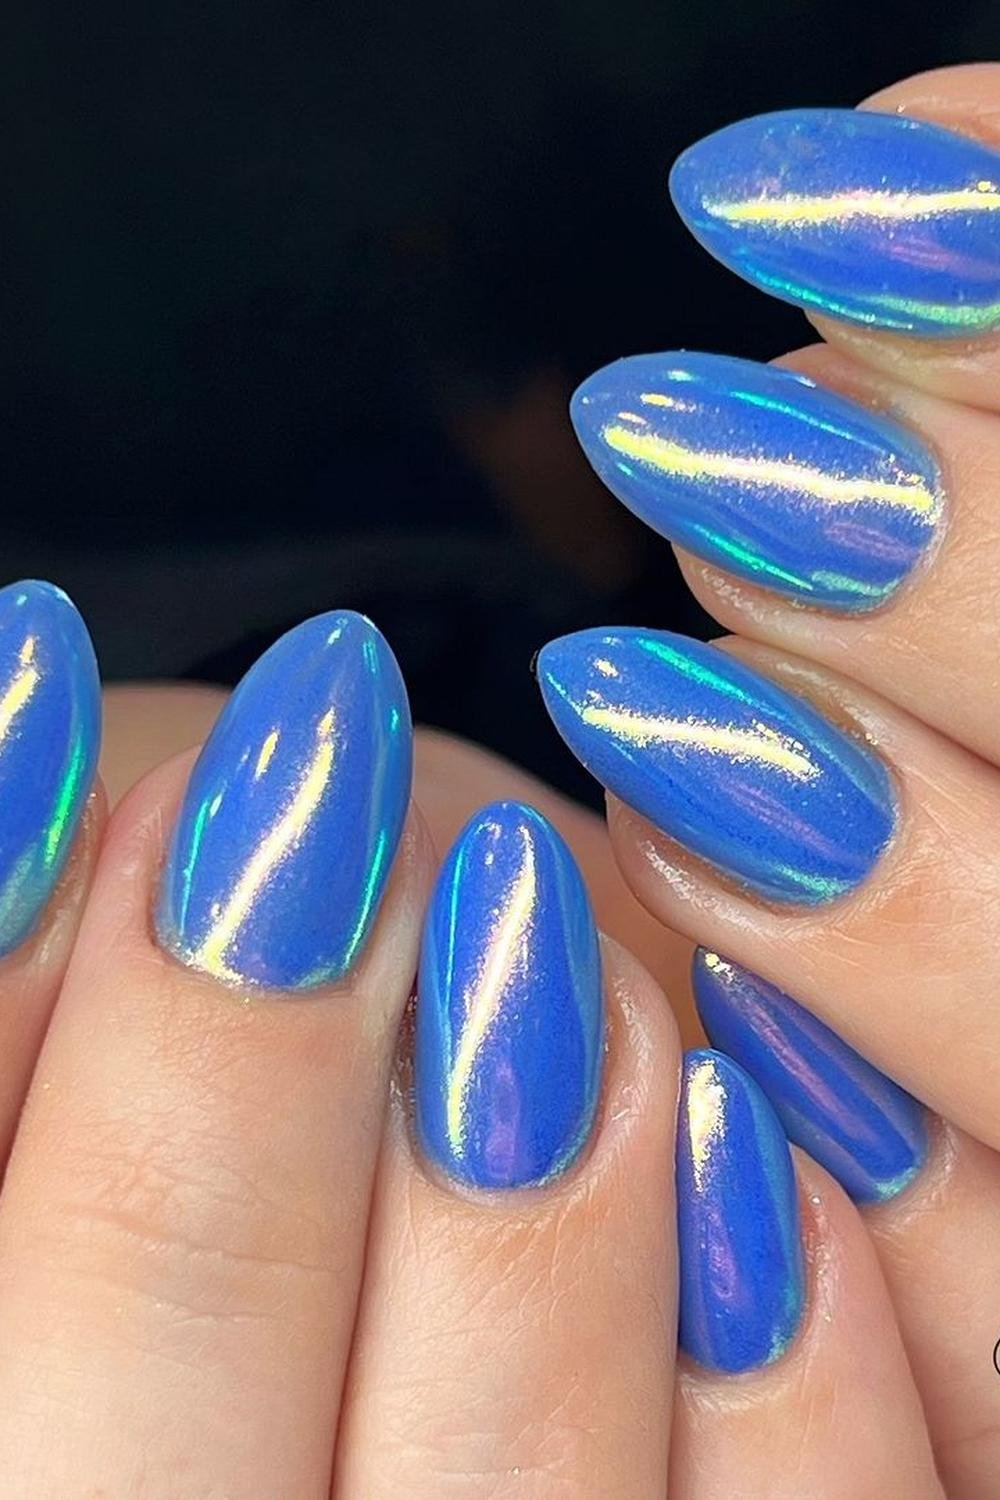 23 - Picture of Blue Chrome Nails